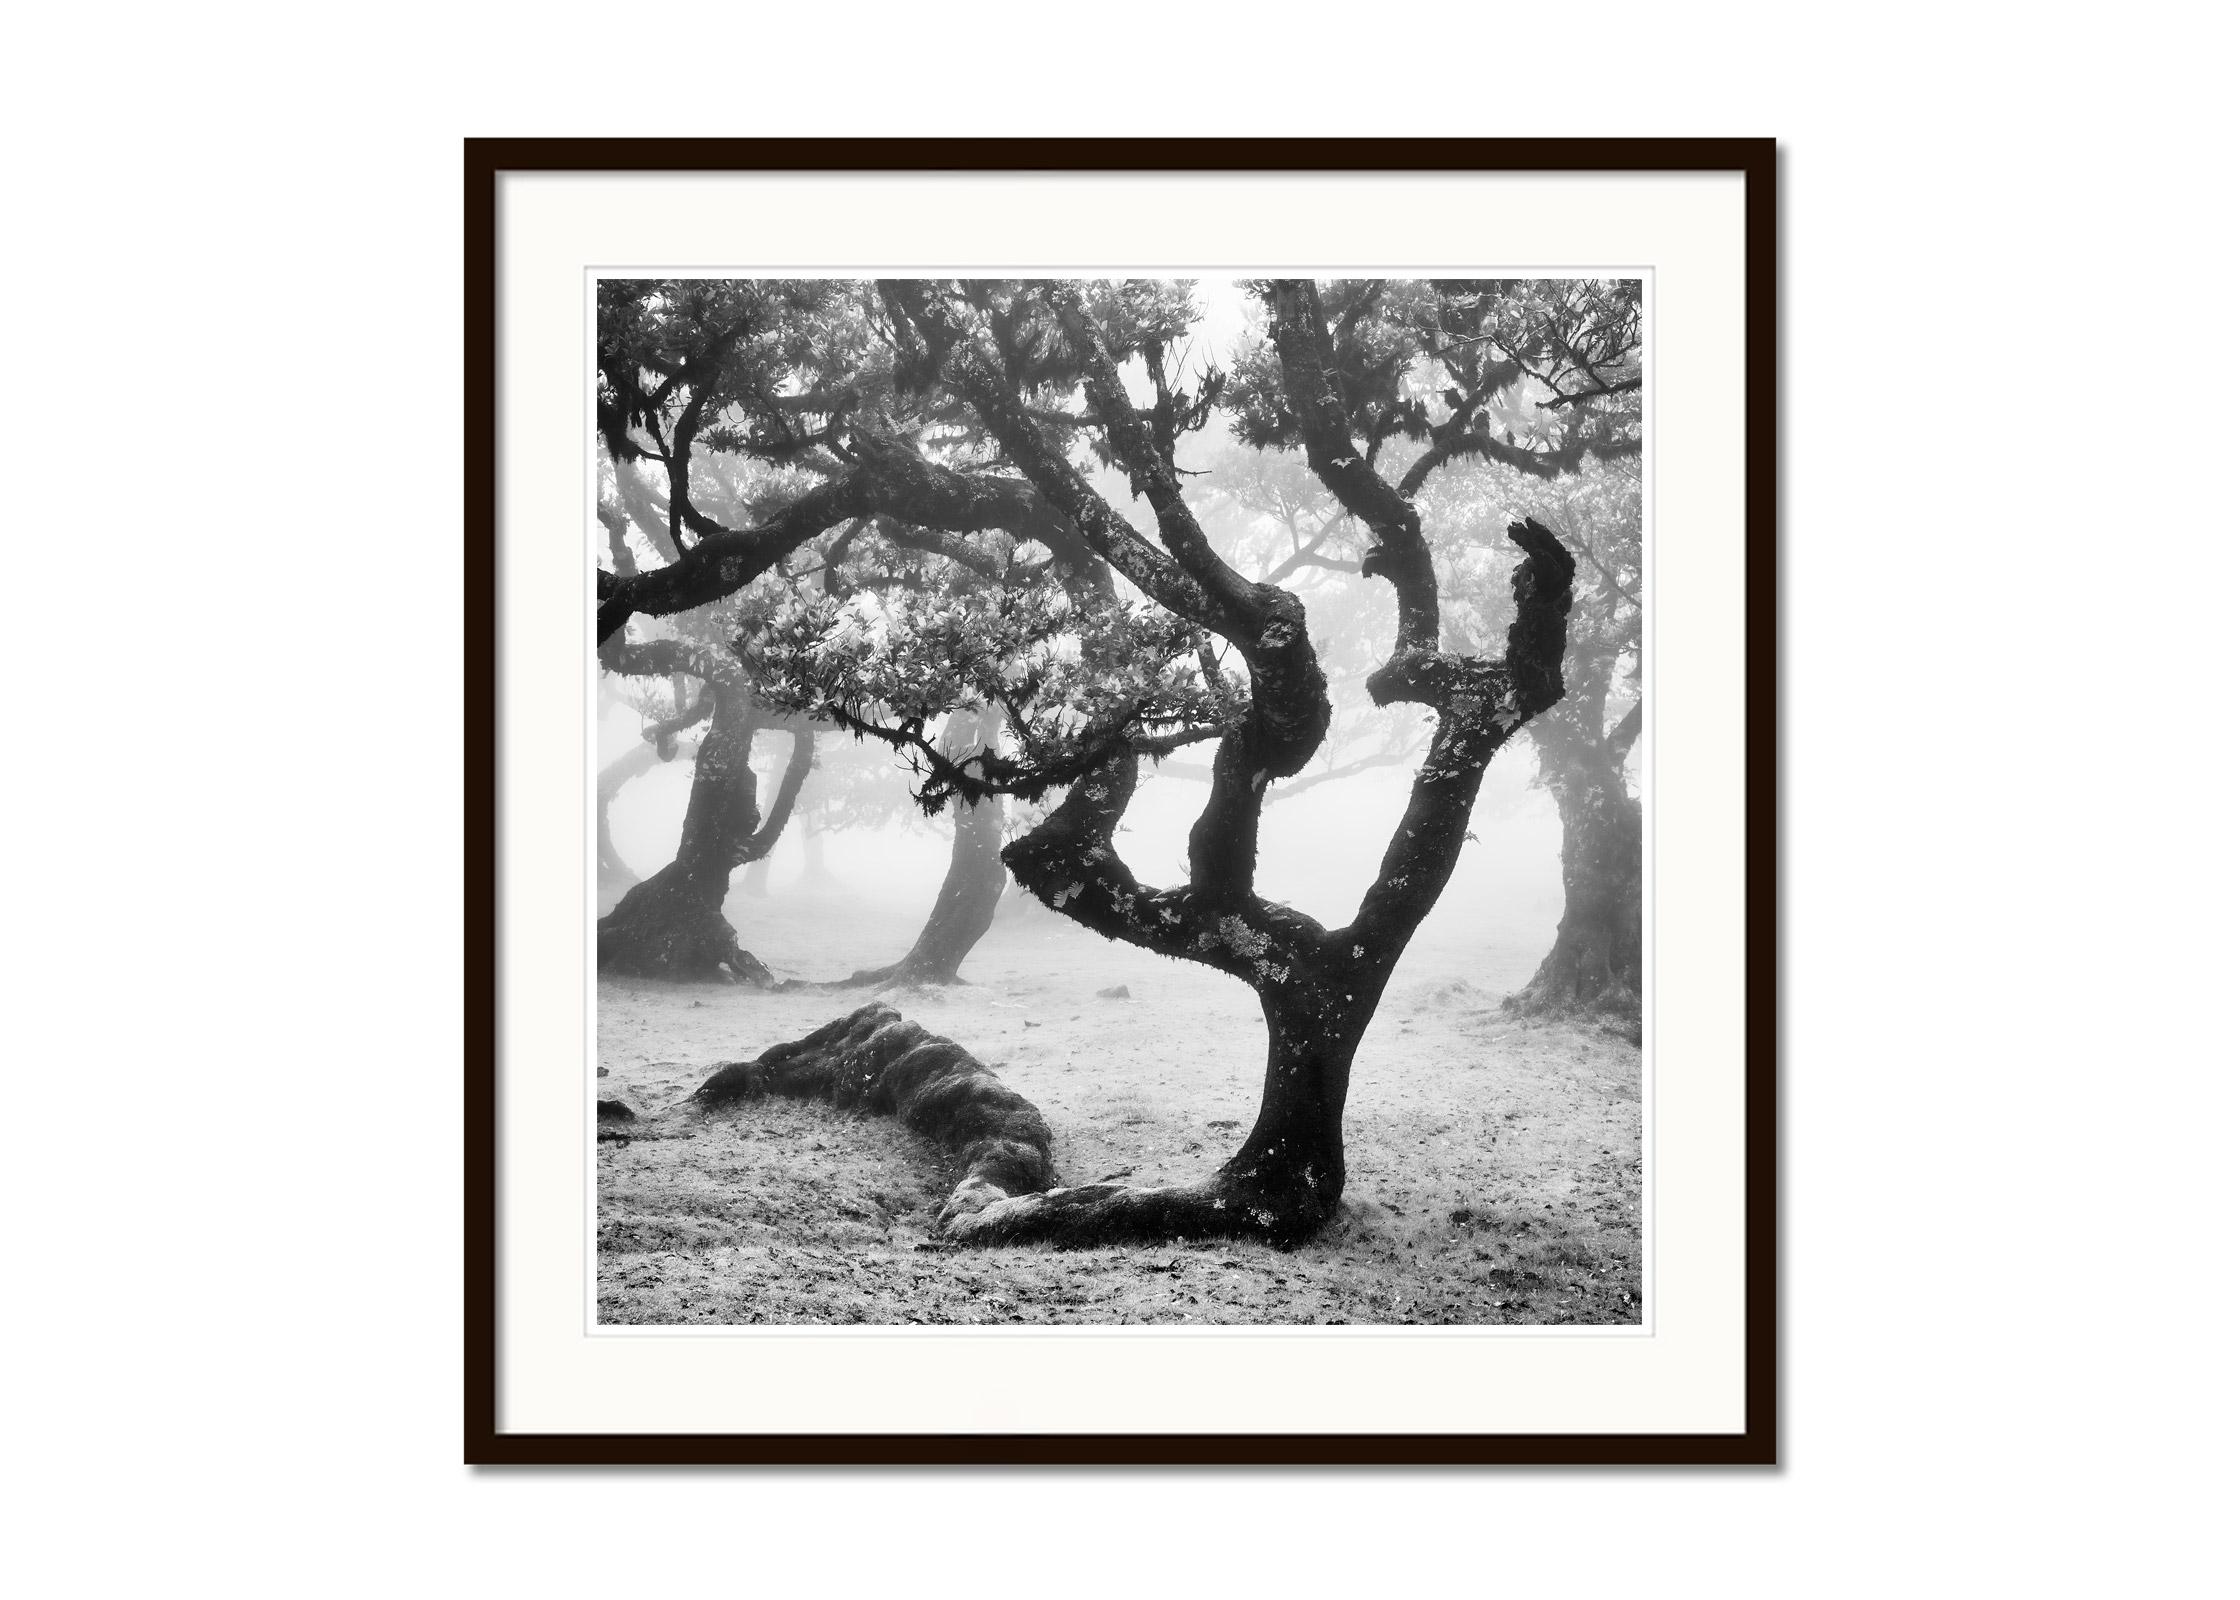 Ancient Laurisilva Forest, curved tree, misty, limited edition fine art print - Gray Landscape Photograph by Gerald Berghammer